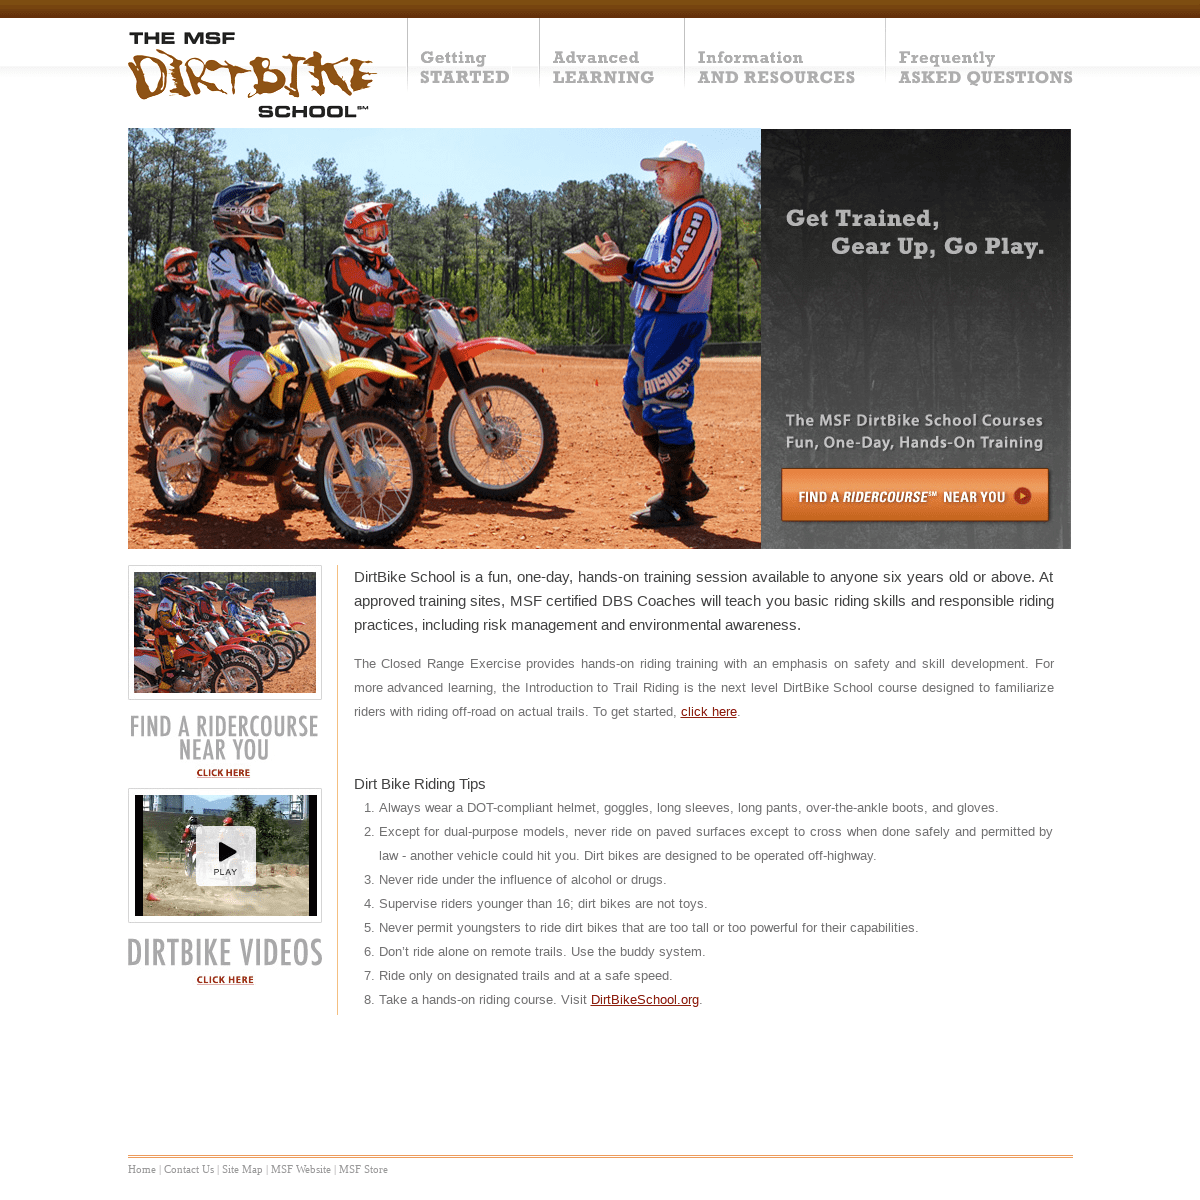 A complete backup of dirtbikeschool.org